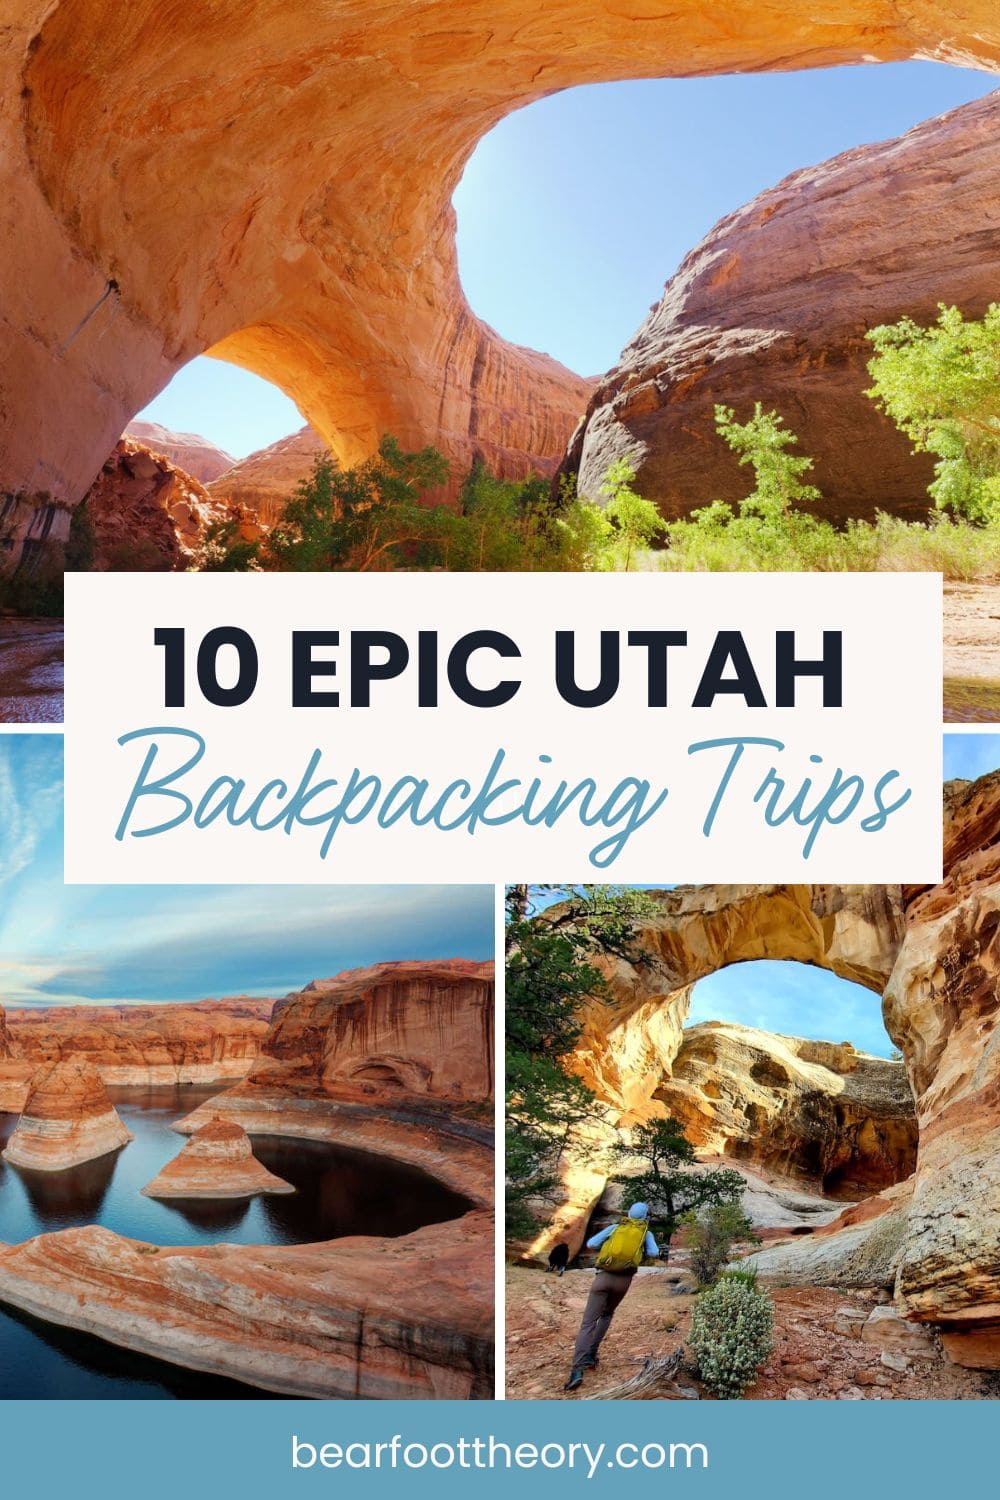 Bearfoot Theory | Looking for an adventure in Utah? Look no further than these top backpacking trips! From the red rock canyons of Zion National Park to the remote wilderness of the Uinta Mountains, Utah offers some of the most stunning and diverse landscapes in the country. Whether you're a seasoned backpacker or a beginner, this blog post will guide you through the best backpacking trips in Utah, with tips on planning your trip, what to pack, and what to expect on the trail.